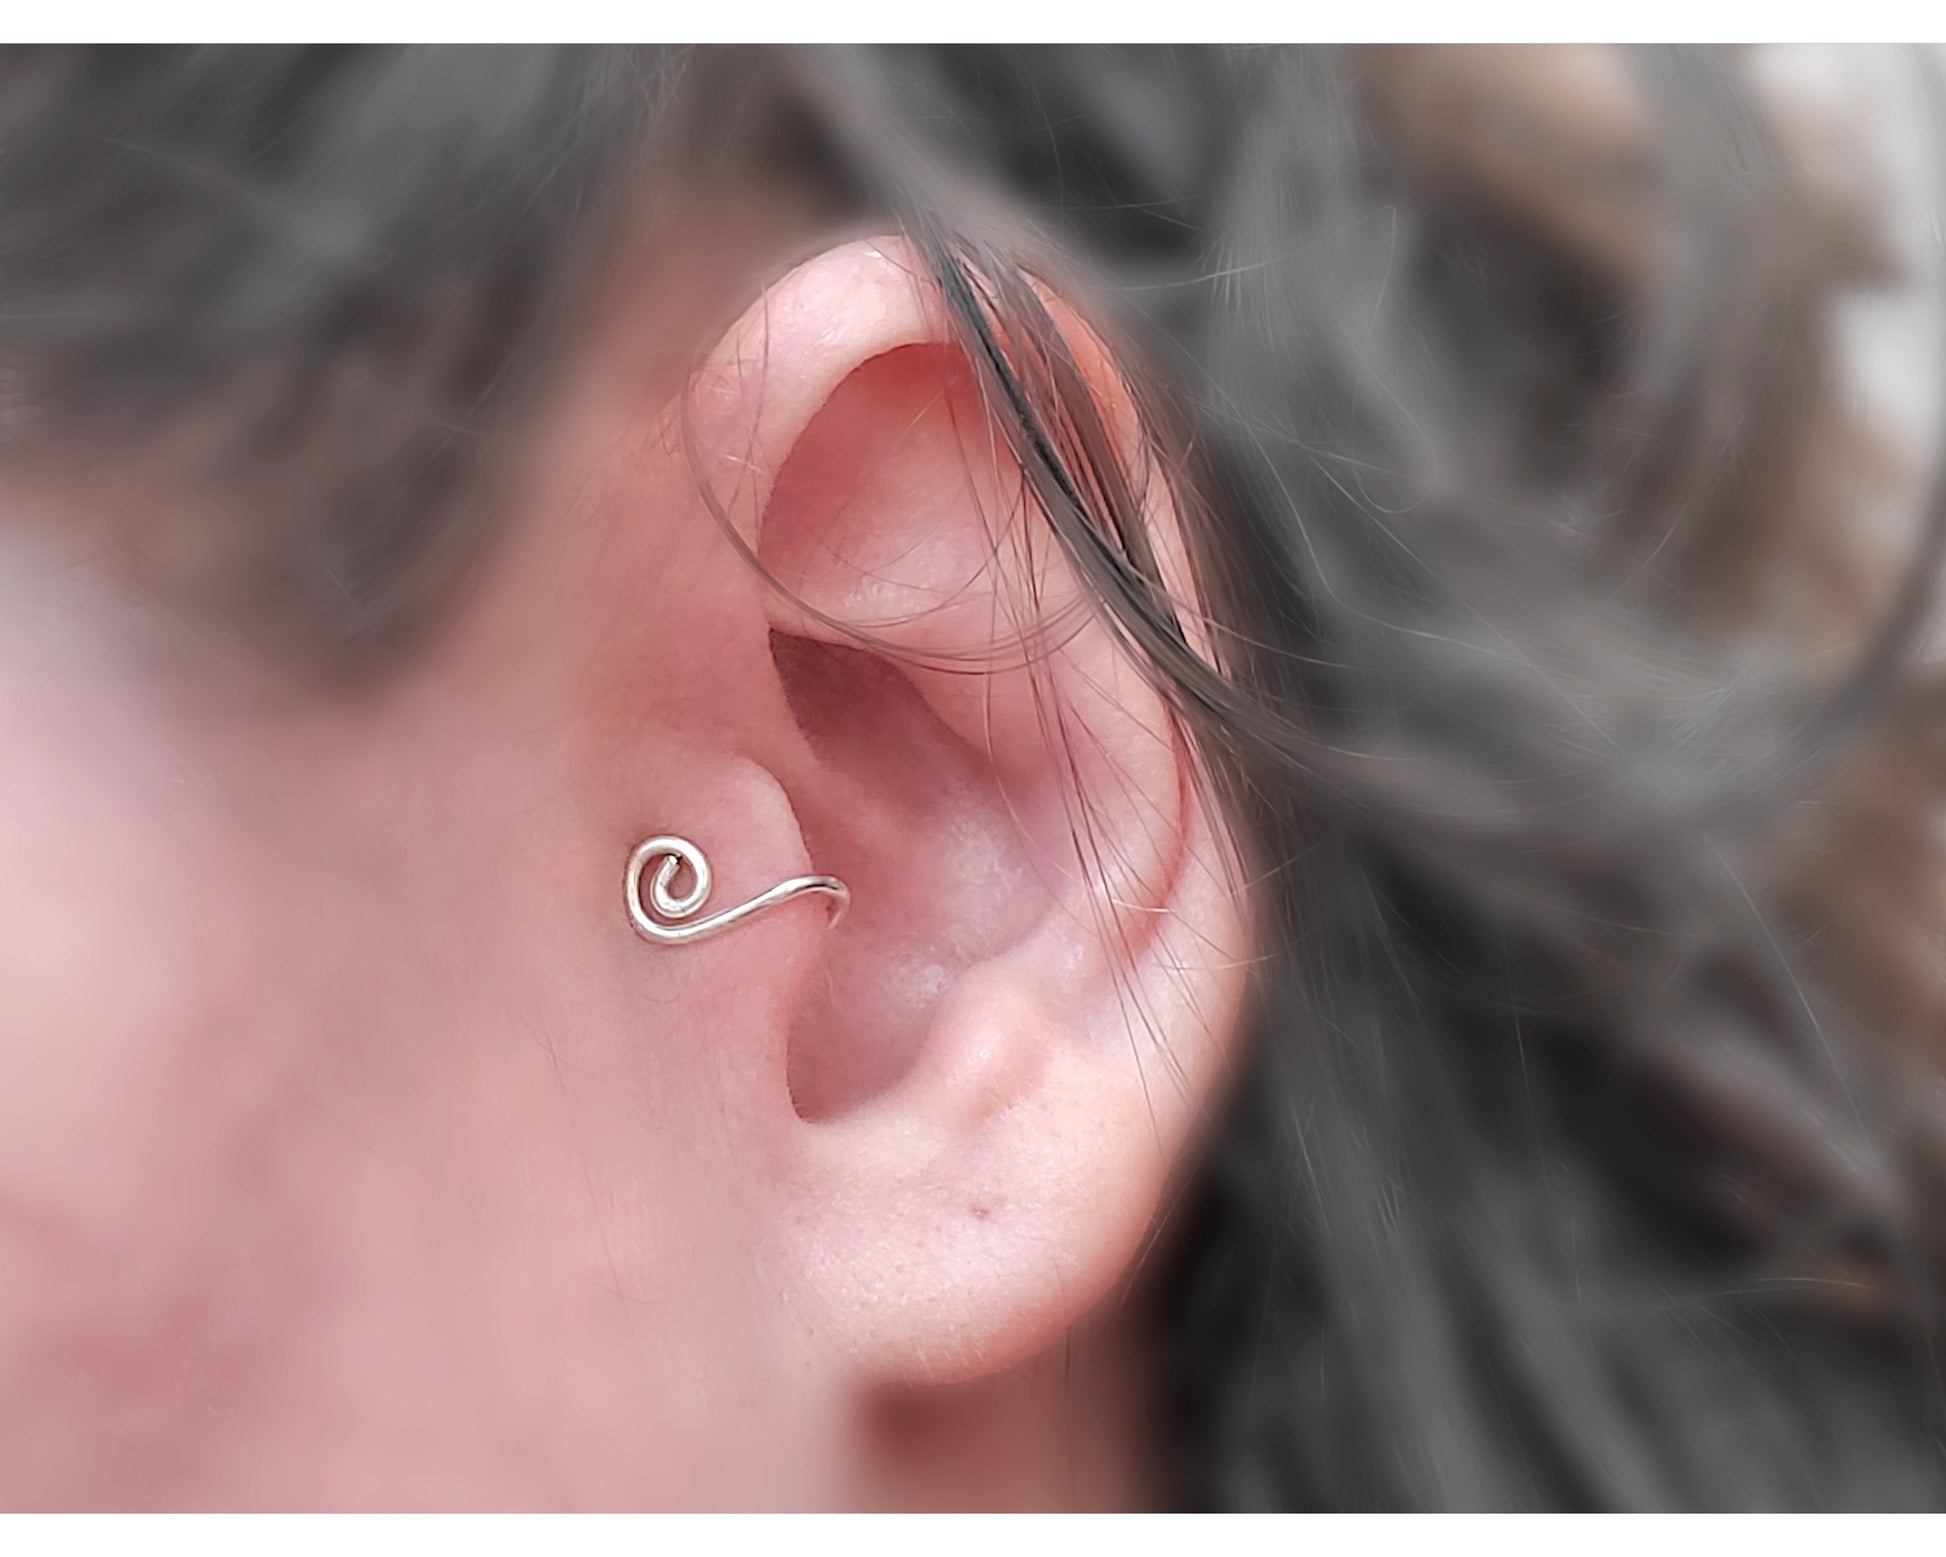 Ear Tragus /Nose Side Cuff, Wonky Square Spiral, Reversible, Adjustable, Simple, Minimalist, Unisex, Boho, Beach, Choice of Colors + Metals